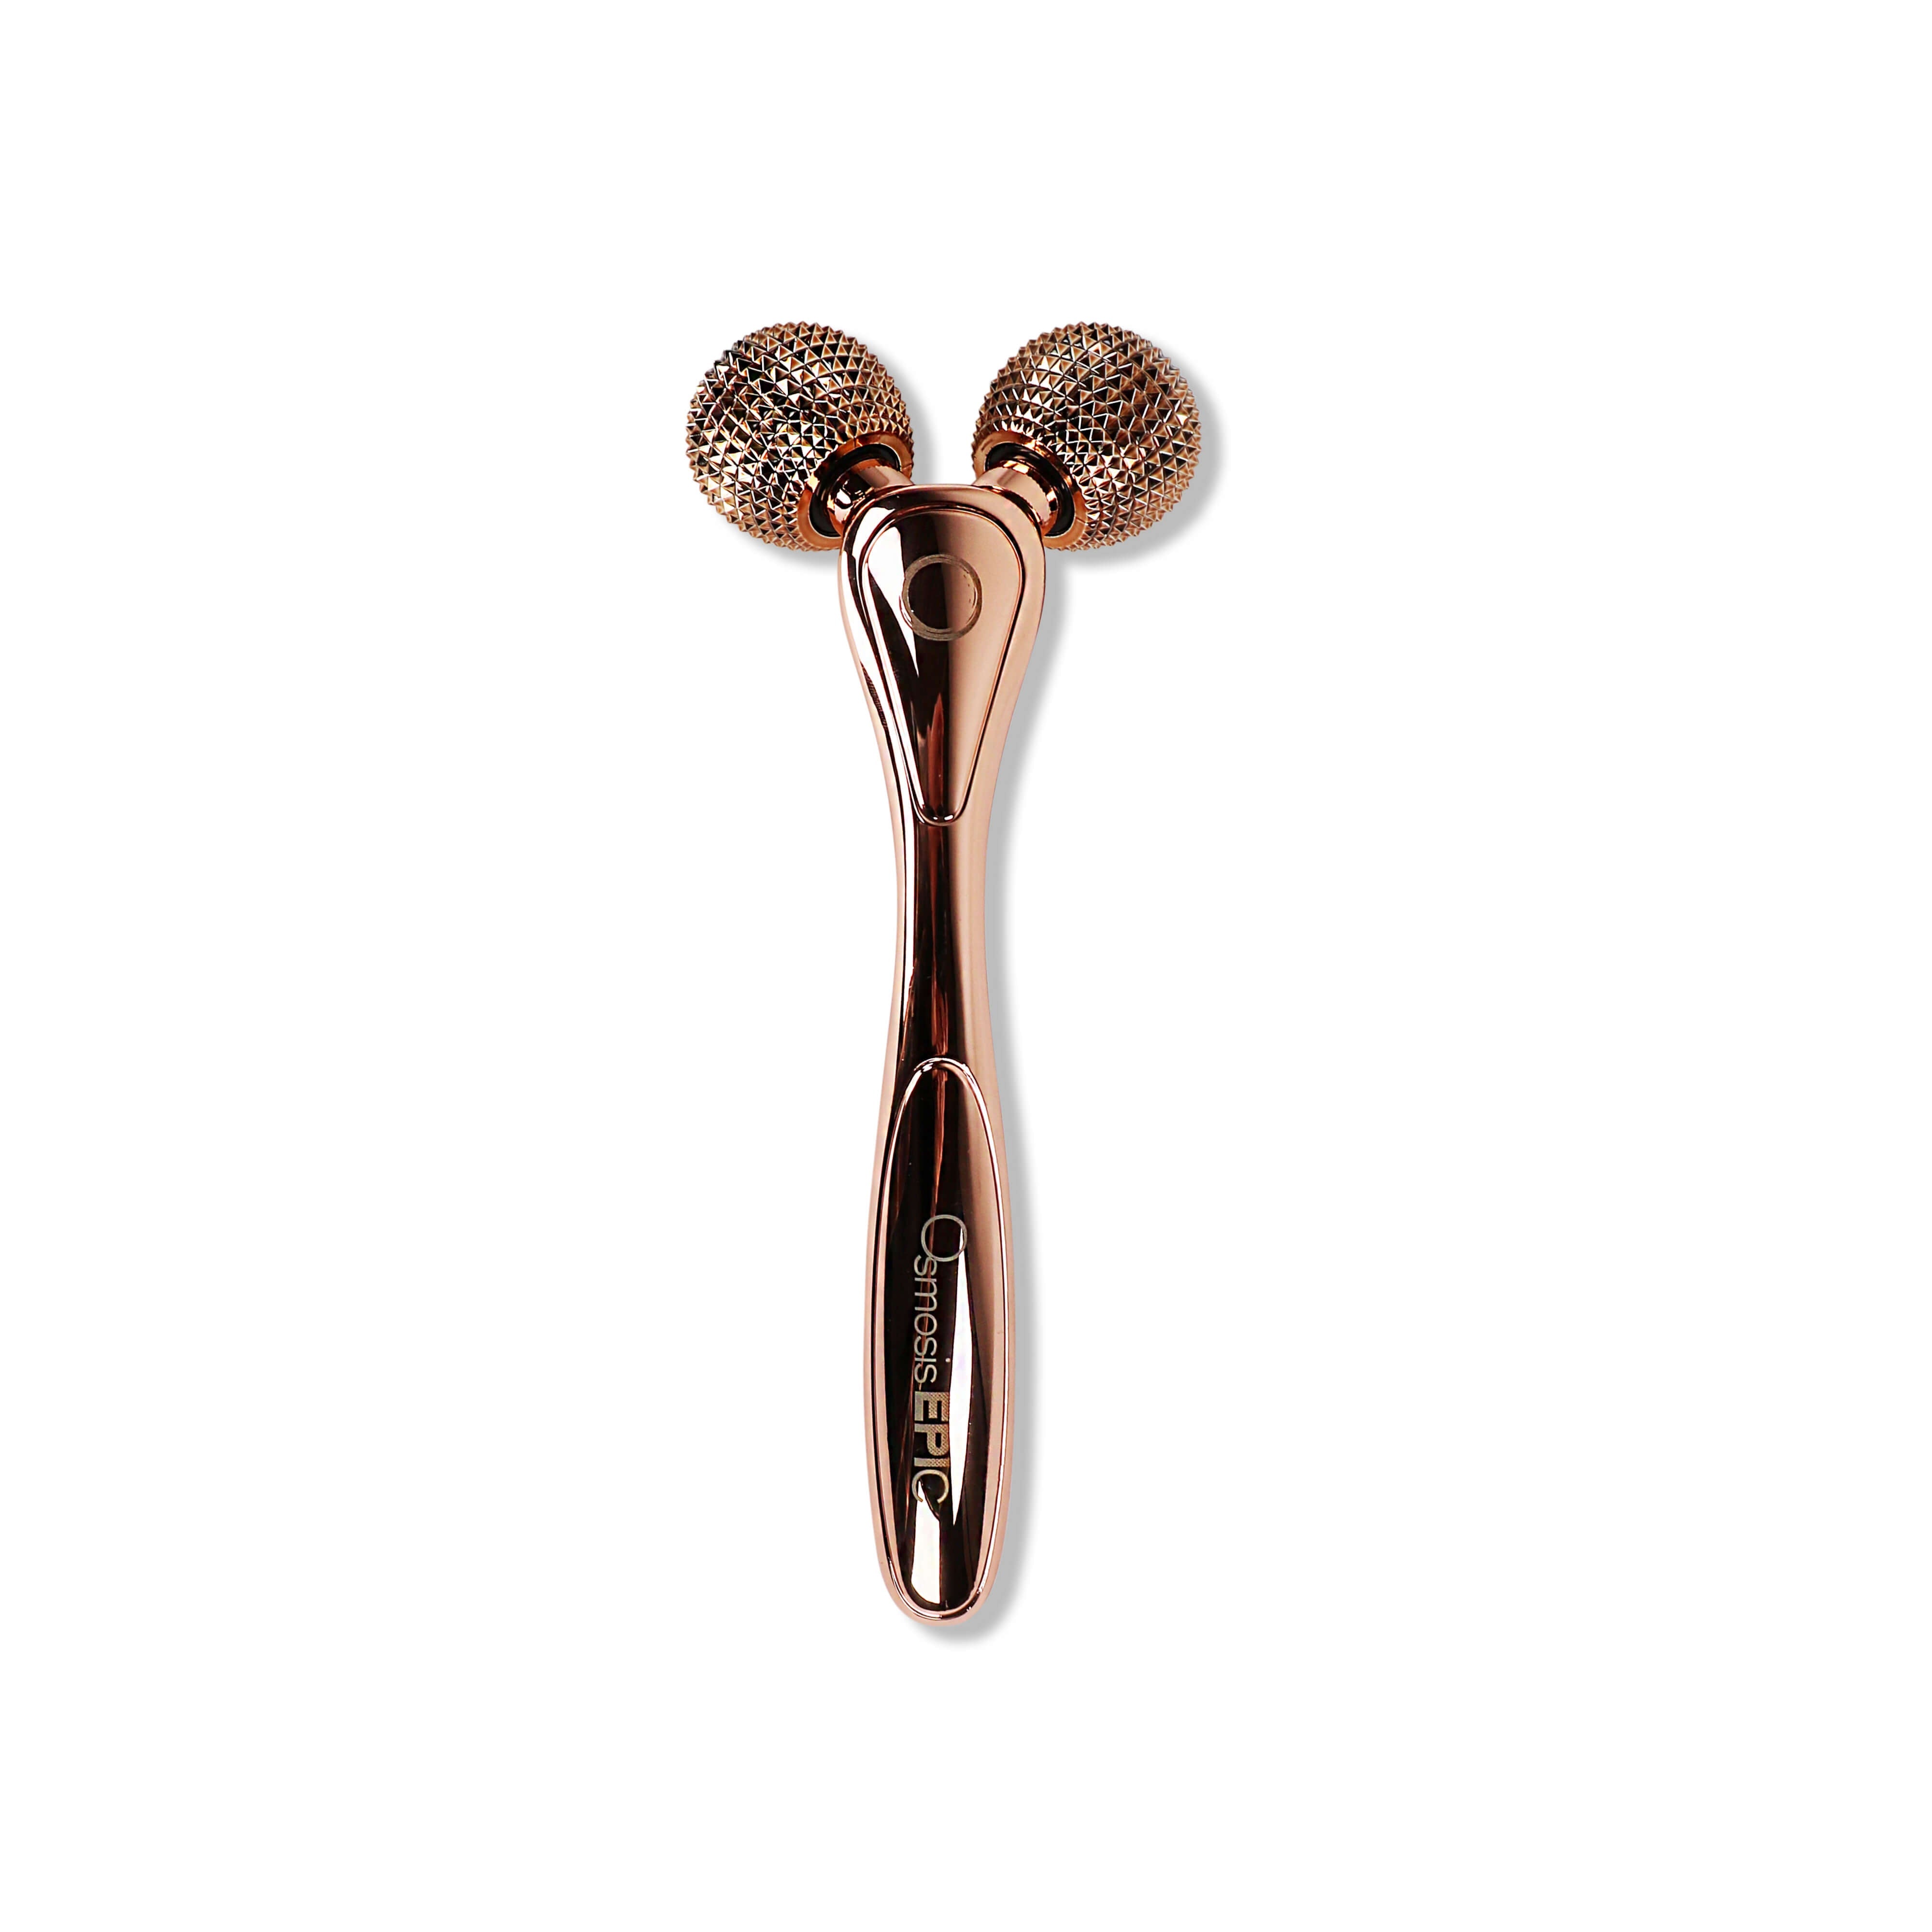 rose gold body tool displayed on white background